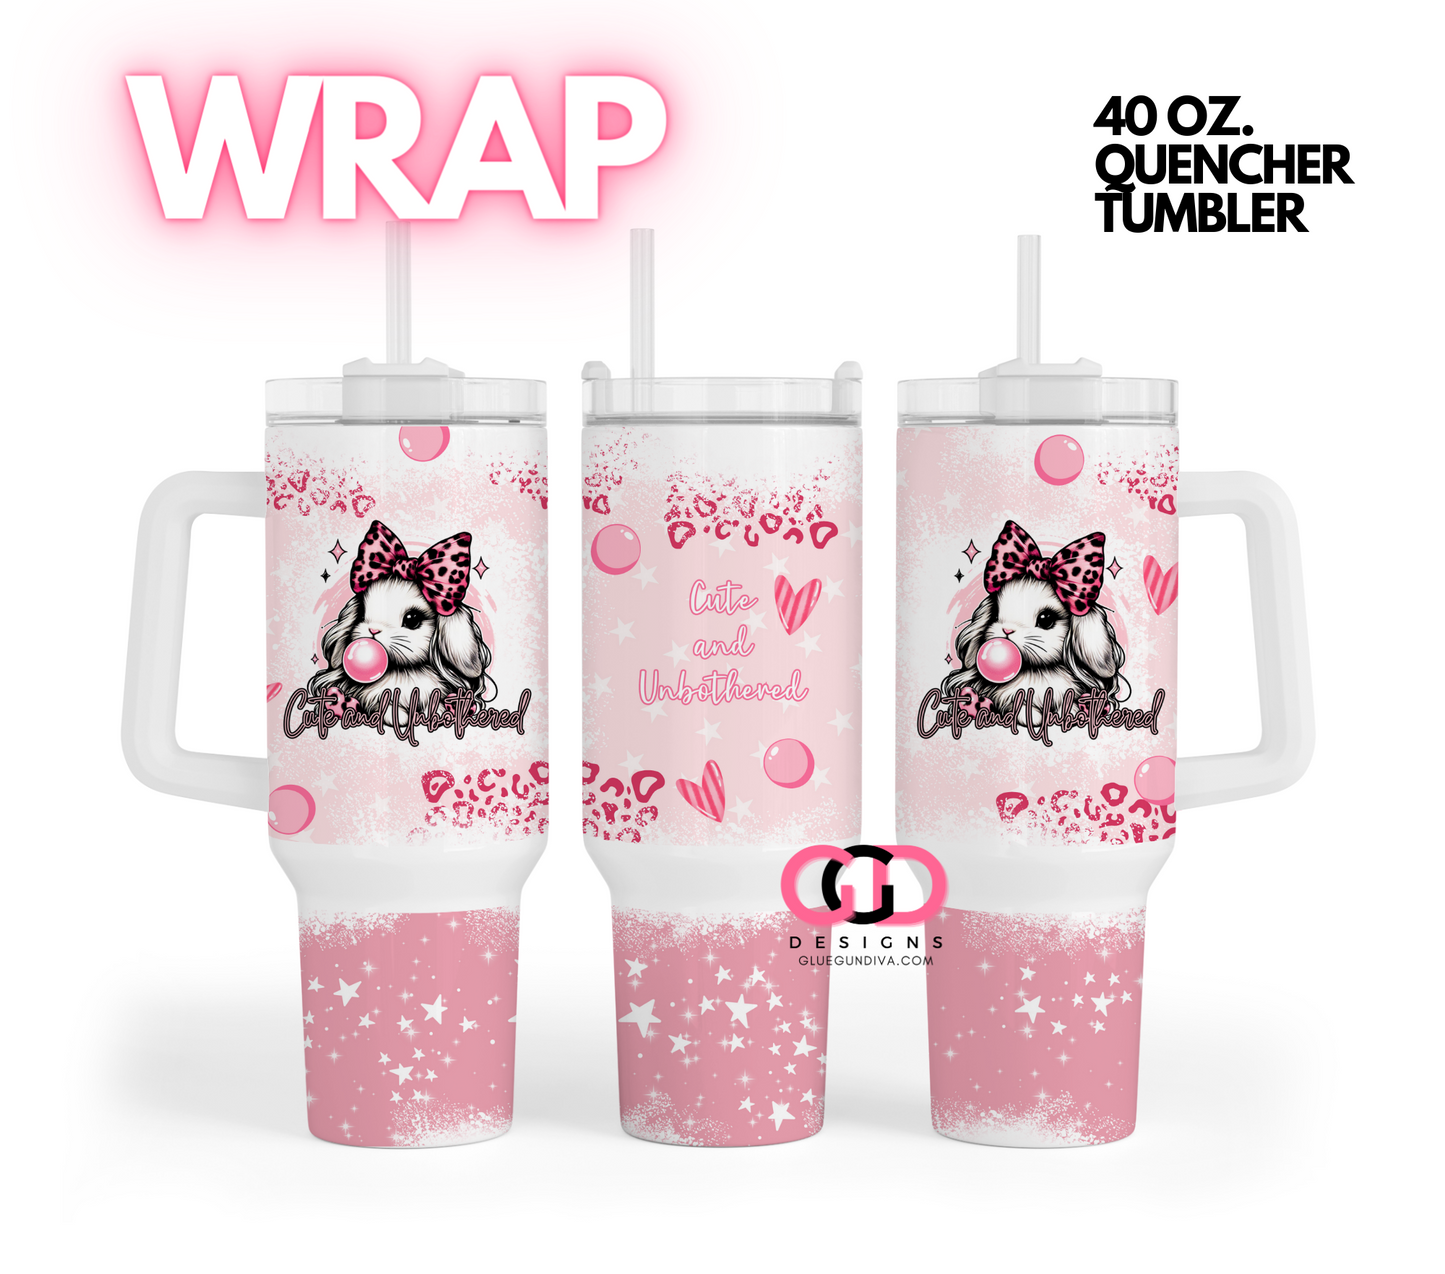 CUTE AND UNBOTHERED -   Digital tumbler wrap for 40 oz tumbler